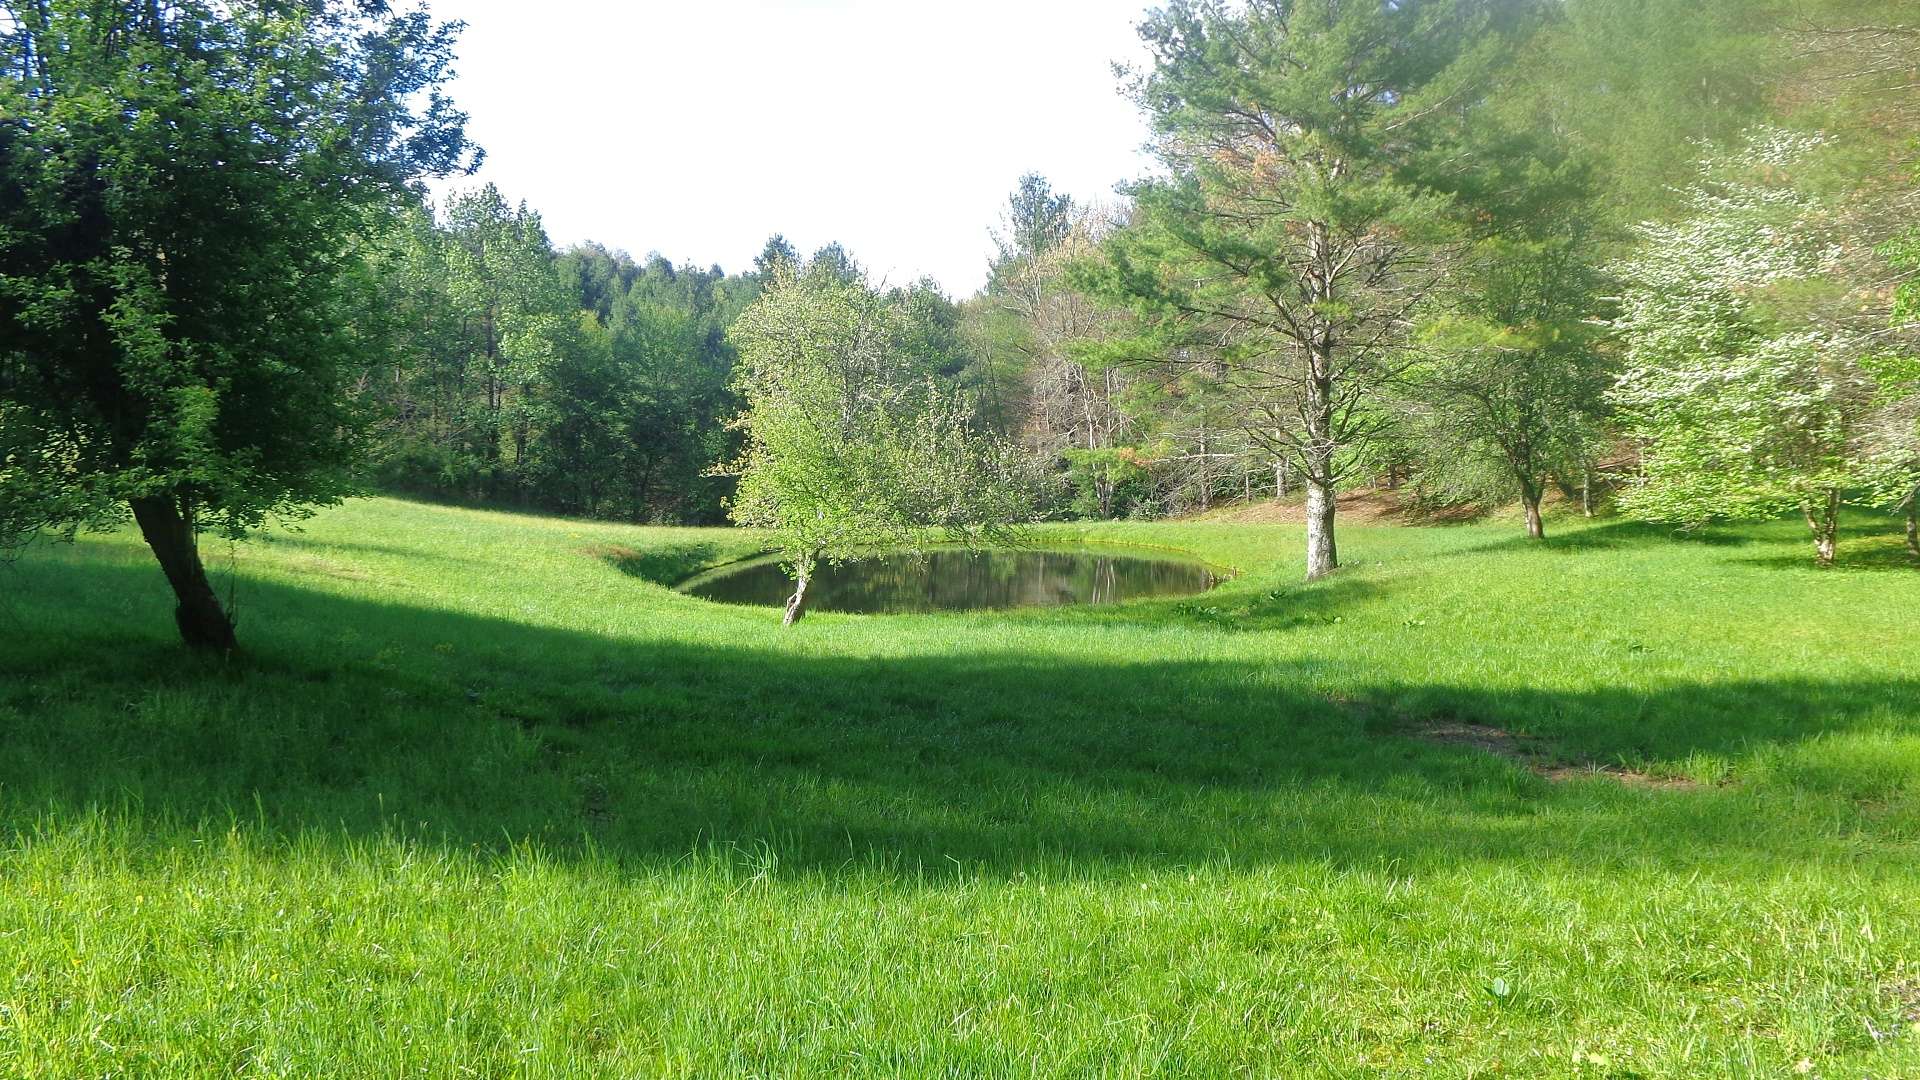 Lot 47 & 48</b>are now available. This is a 9.3 acre wooded tract offering a private pond.